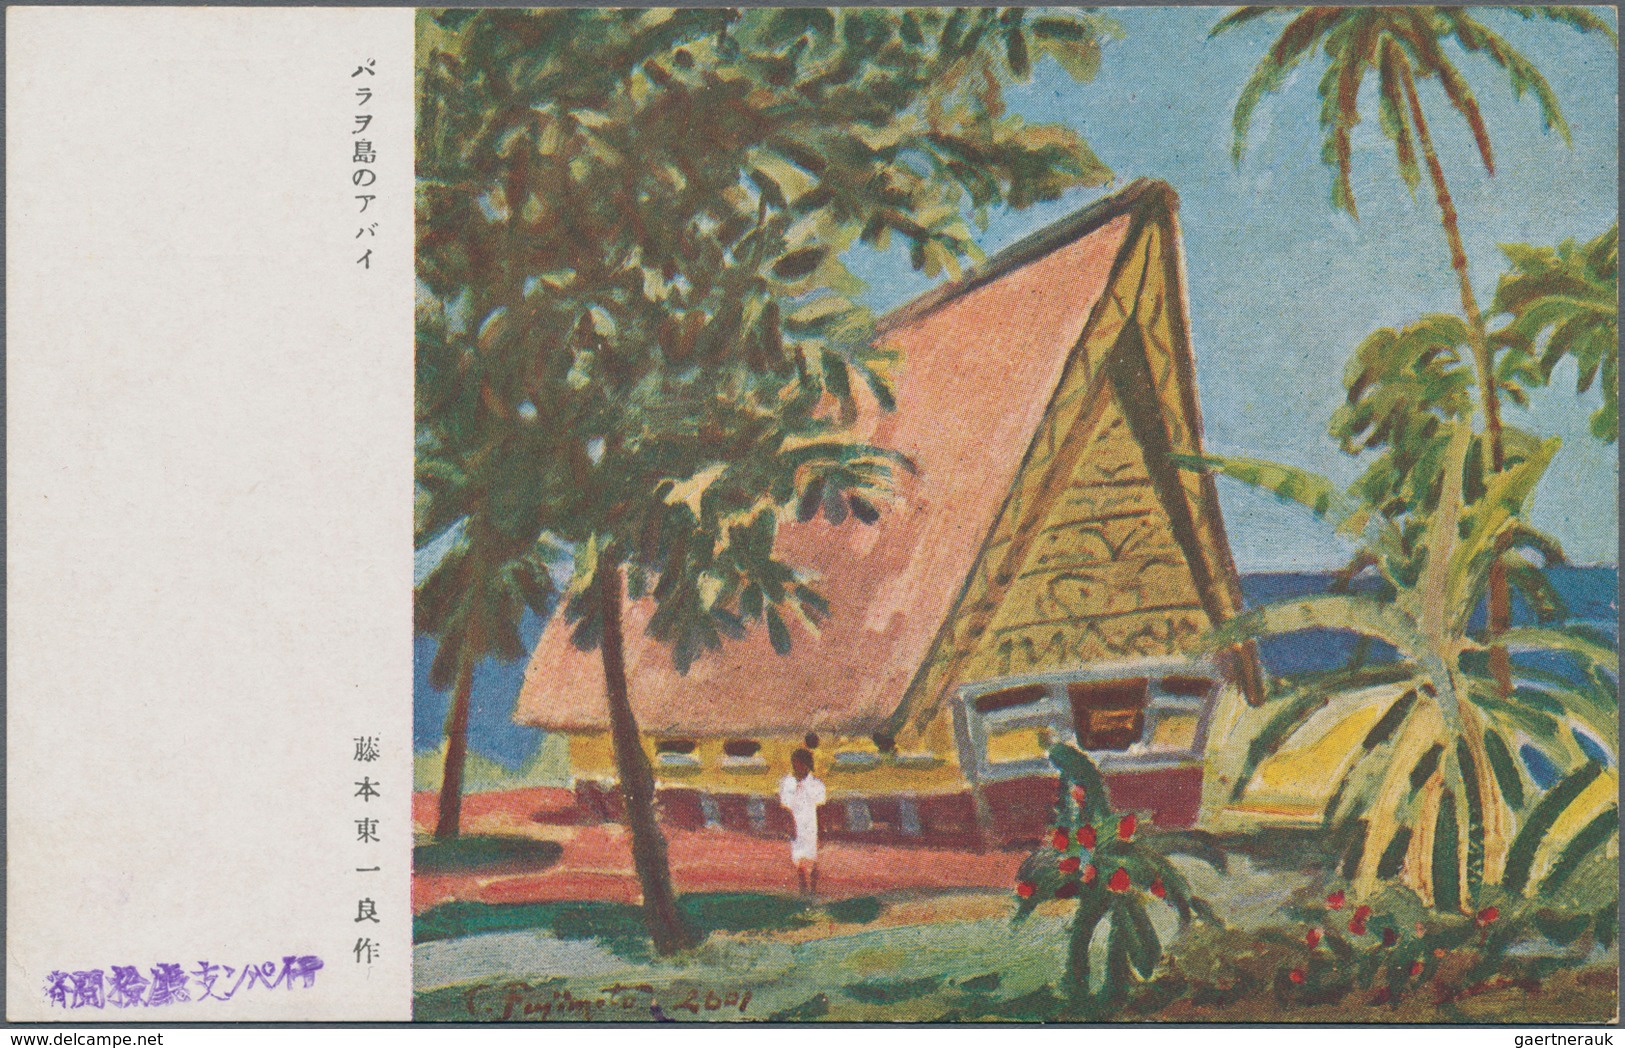 Japan - Besonderheiten: 1940, Nanyo South Sea Mandated islands: two ppc sets with 4 cards each showi